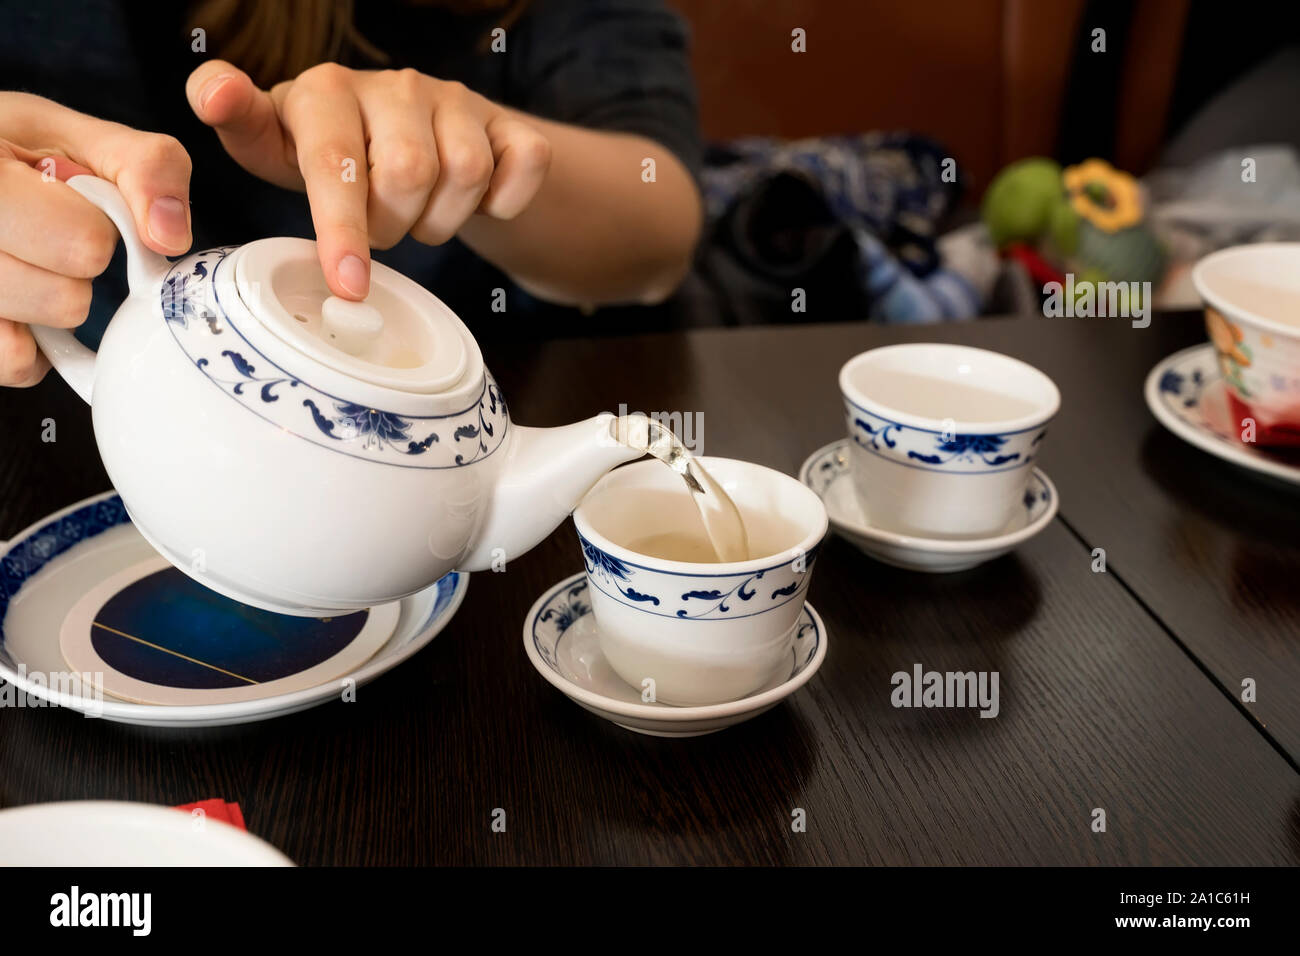 Teapot in the hands of a girl pouring green tea into beautiful chinese cups Stock Photo